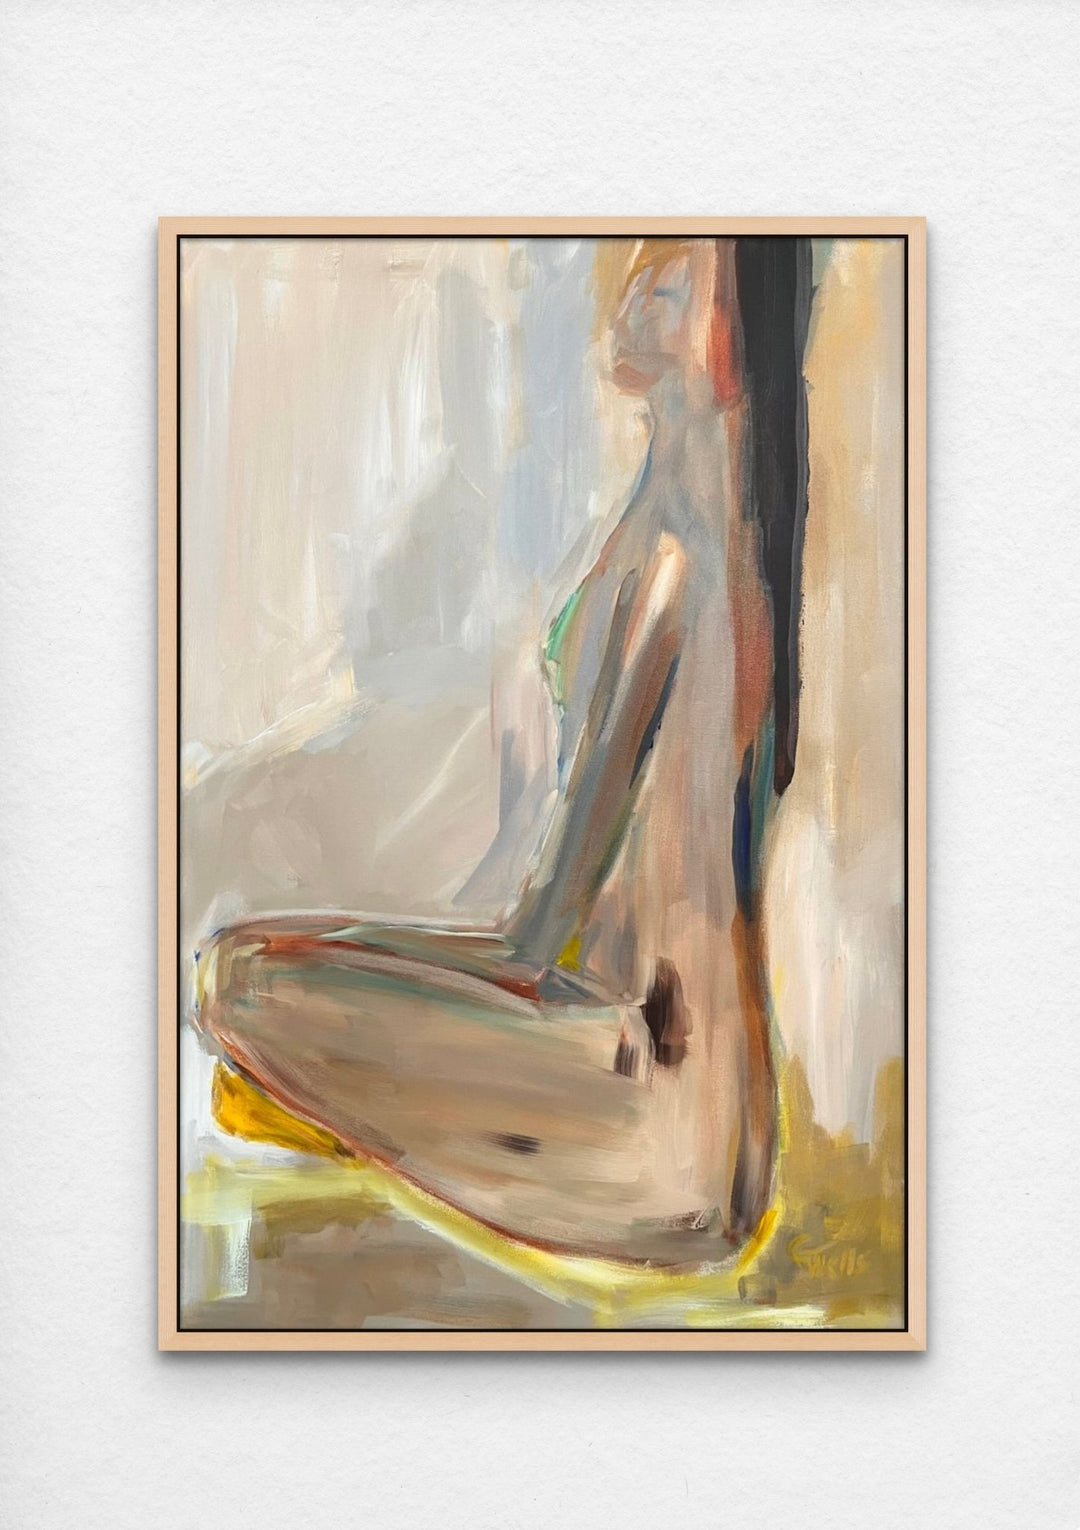 Acrylic painting of sitting female figure's profile in teal installation view - Artly International